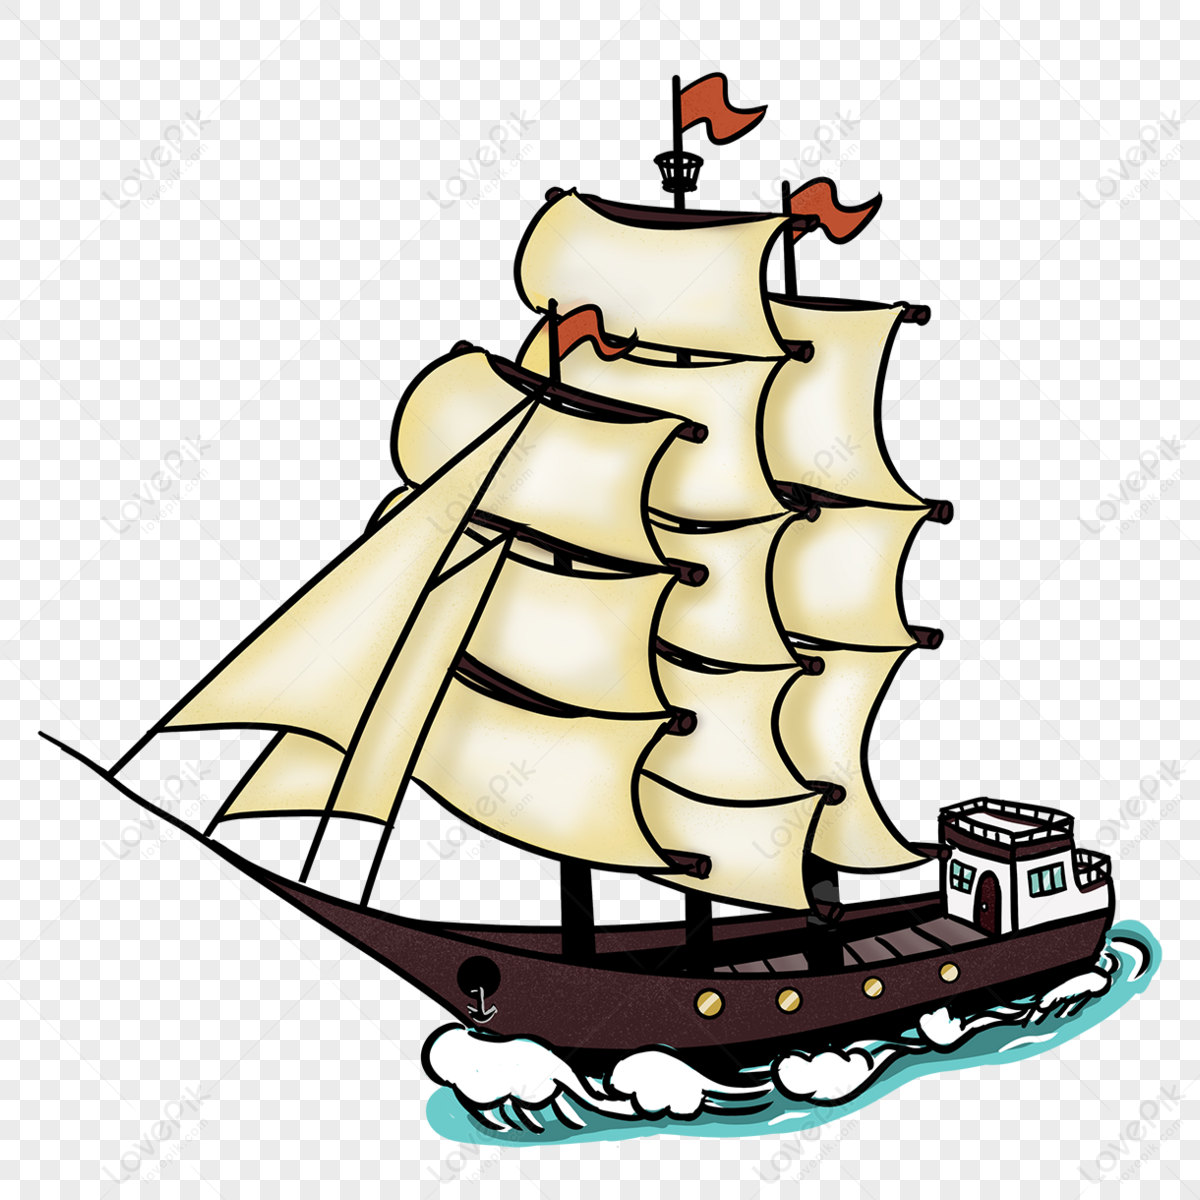 Cartoon style yellow clip art sailing boat,sailboat,ferry free png